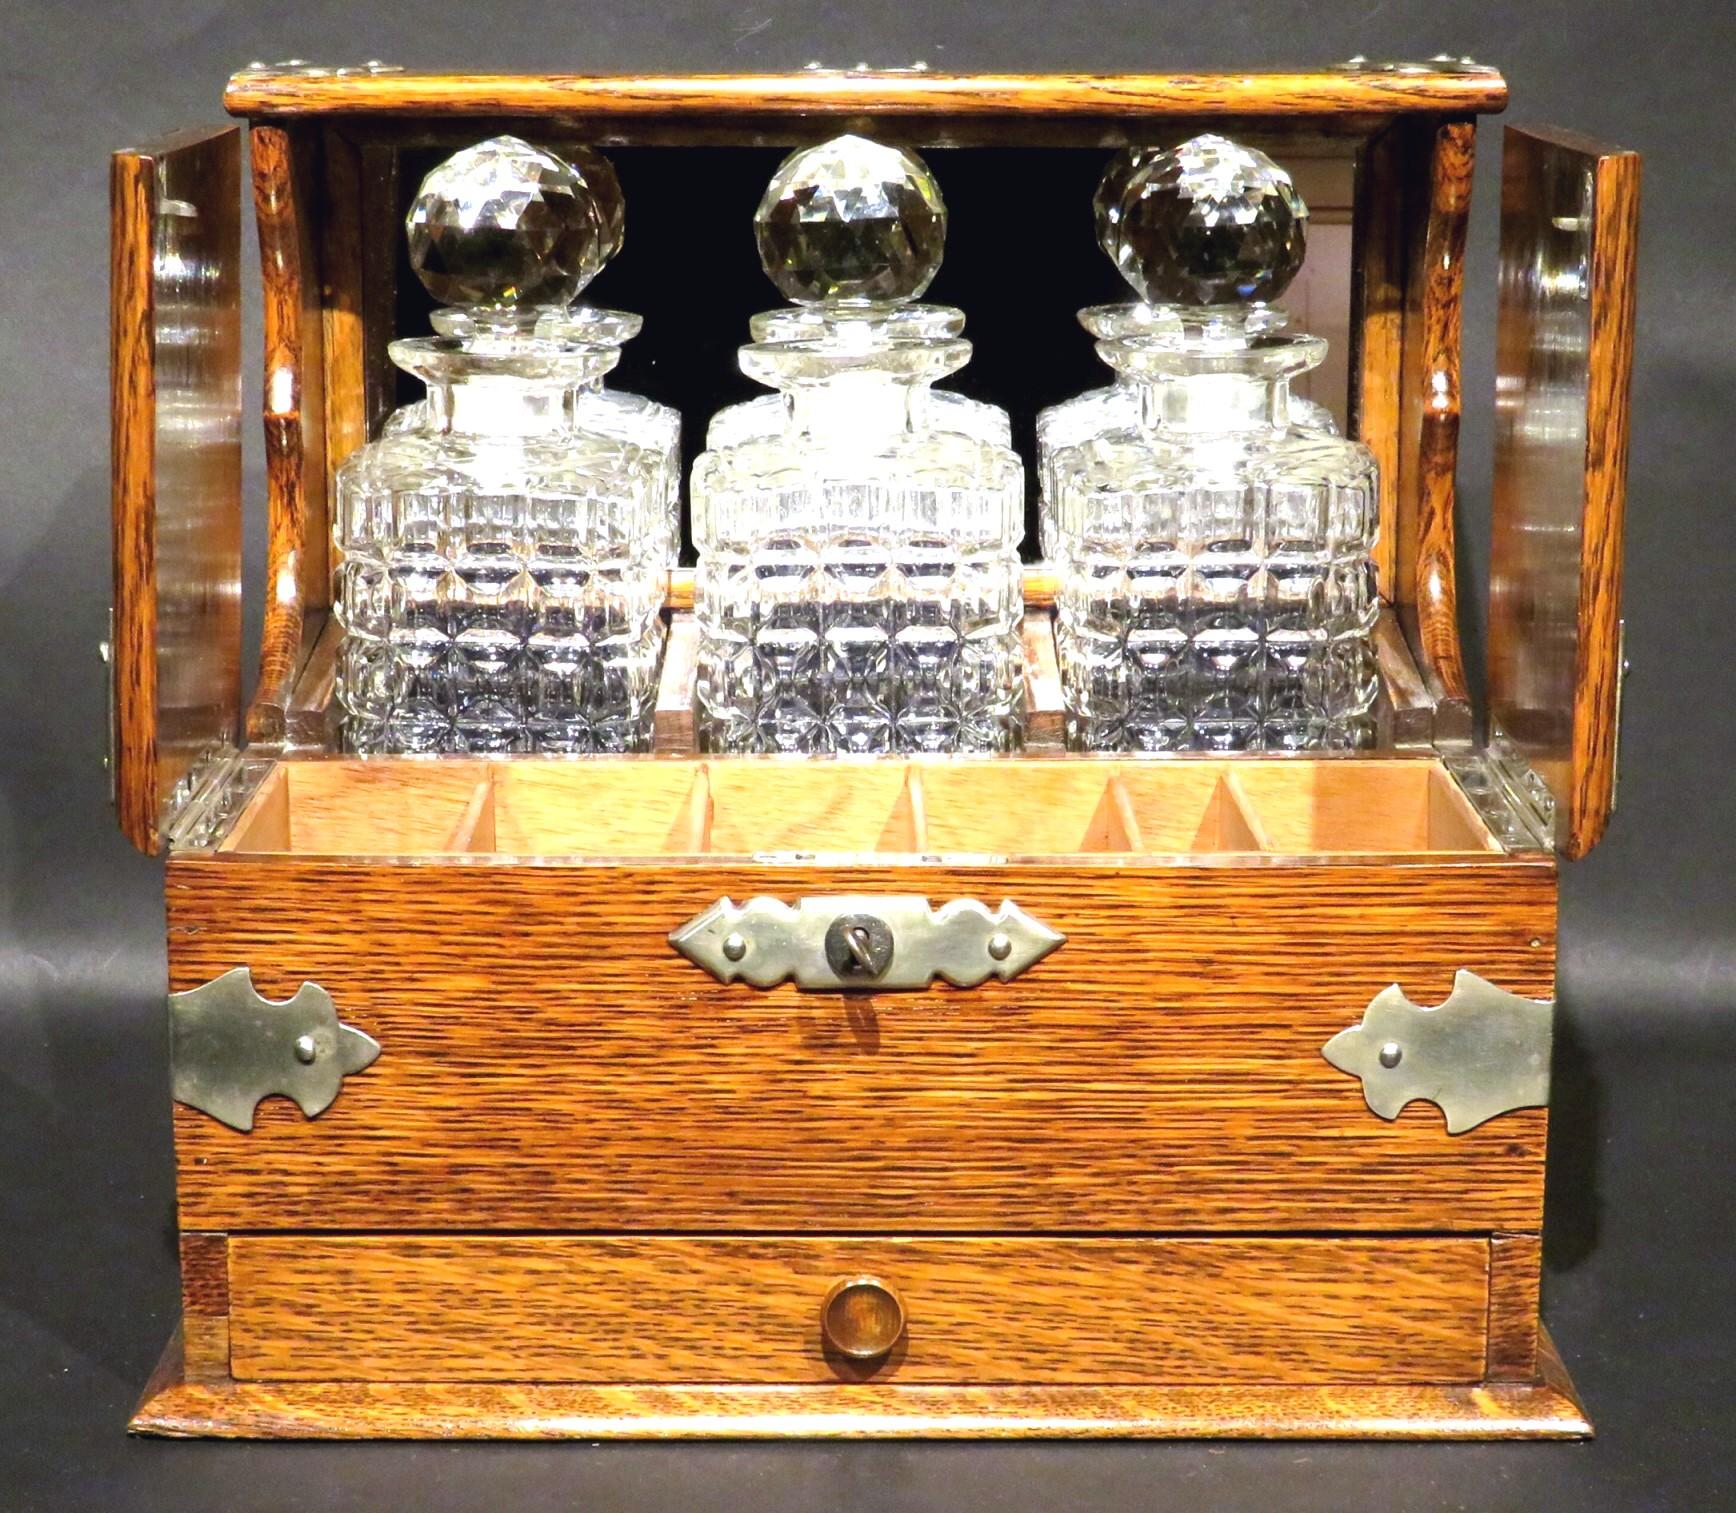 A Very Good Early 20th Century Oak & Silver Plated Tantalus, U.K. Circa 1910 For Sale 1